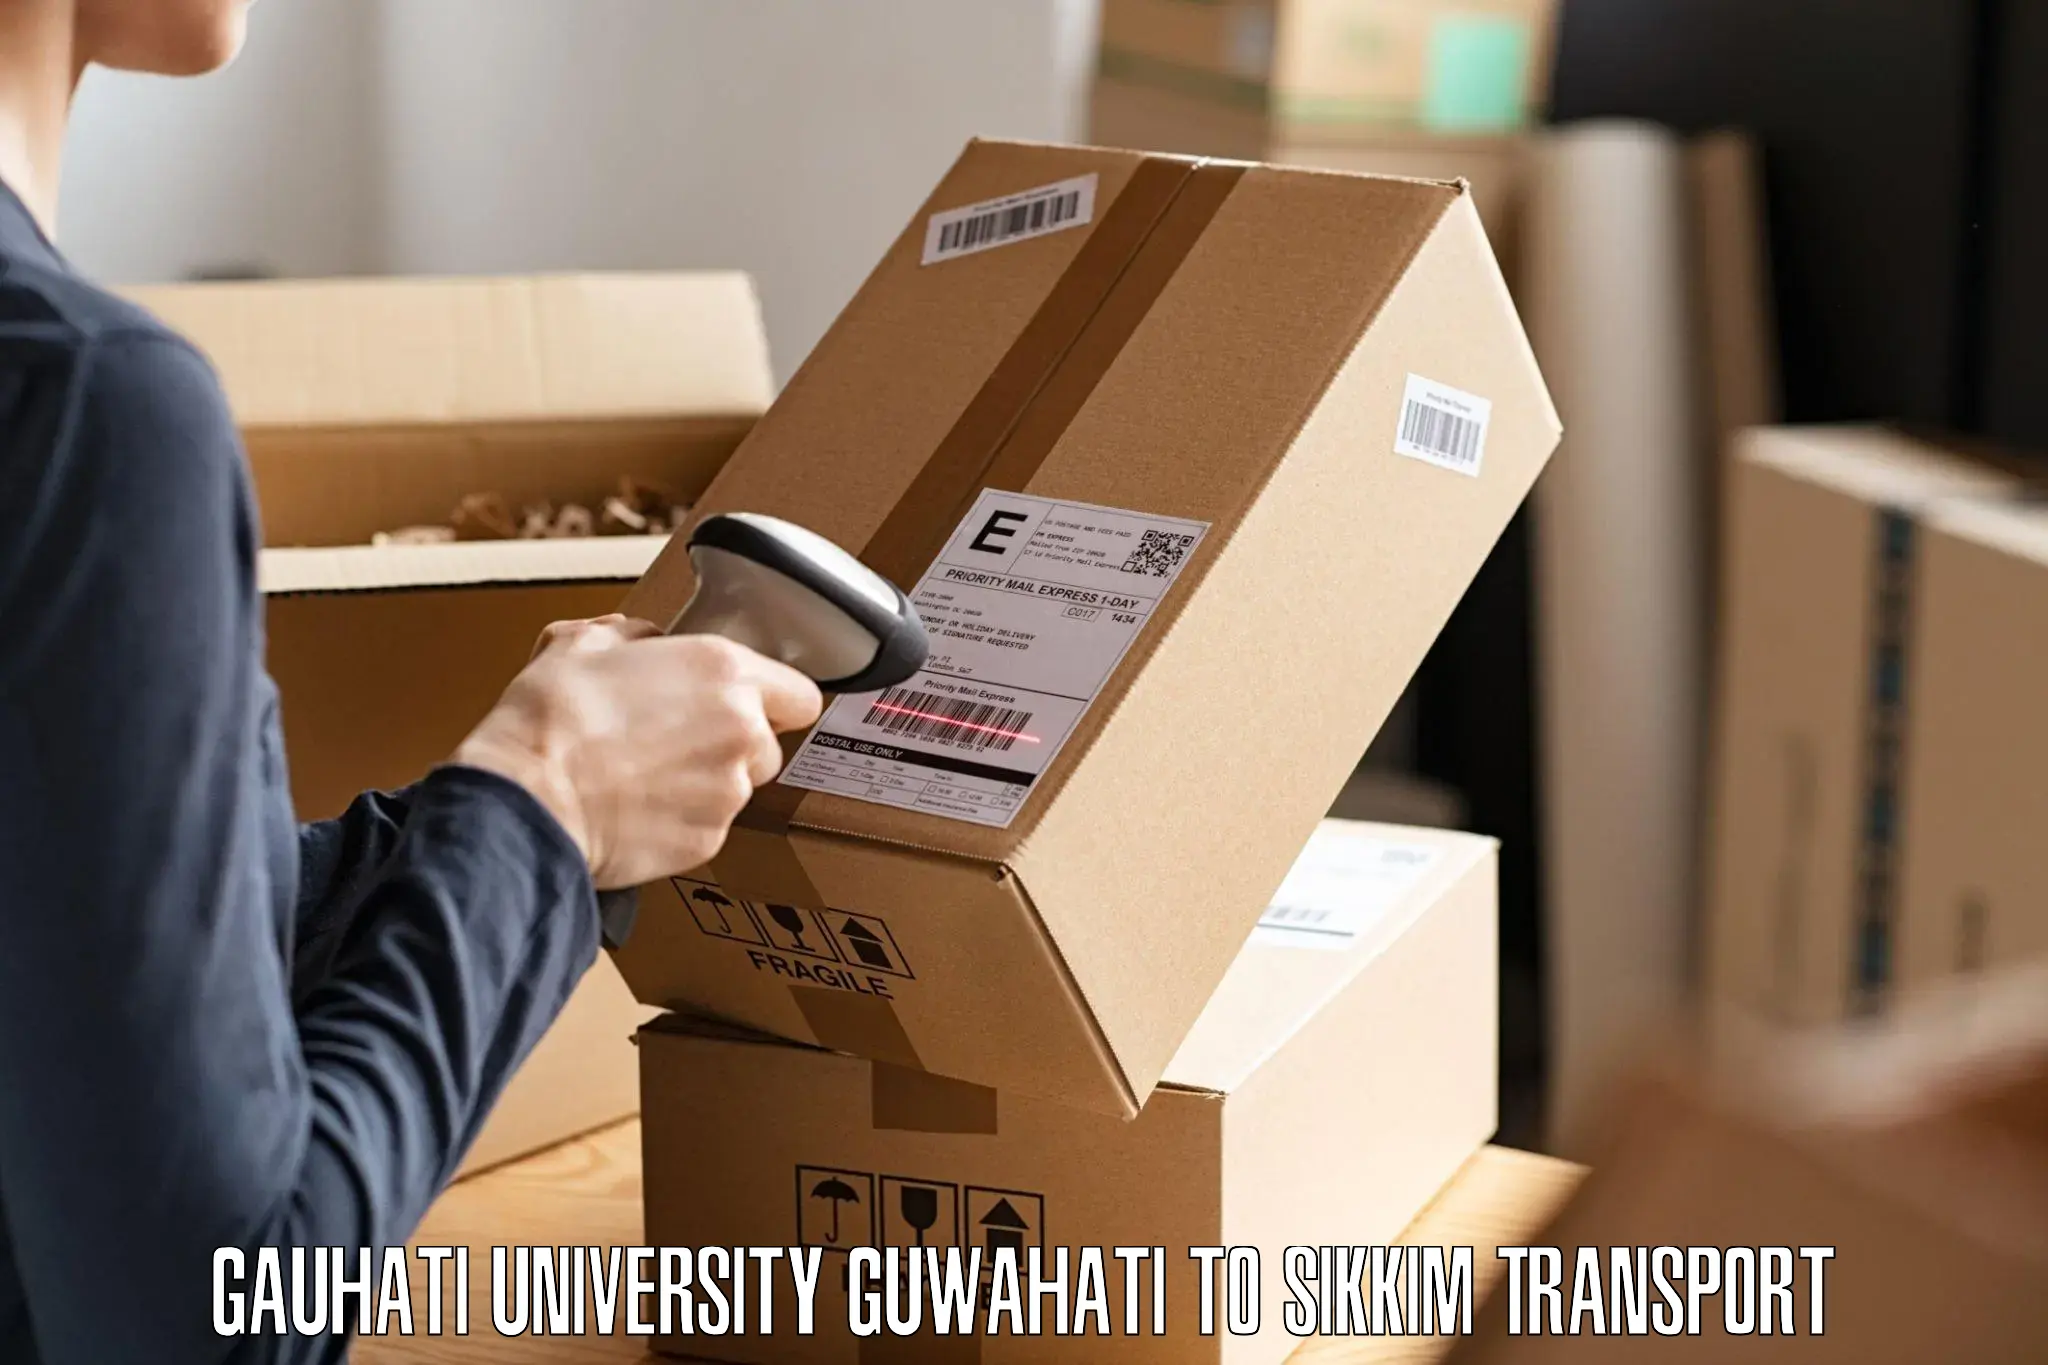 Package delivery services Gauhati University Guwahati to Pelling